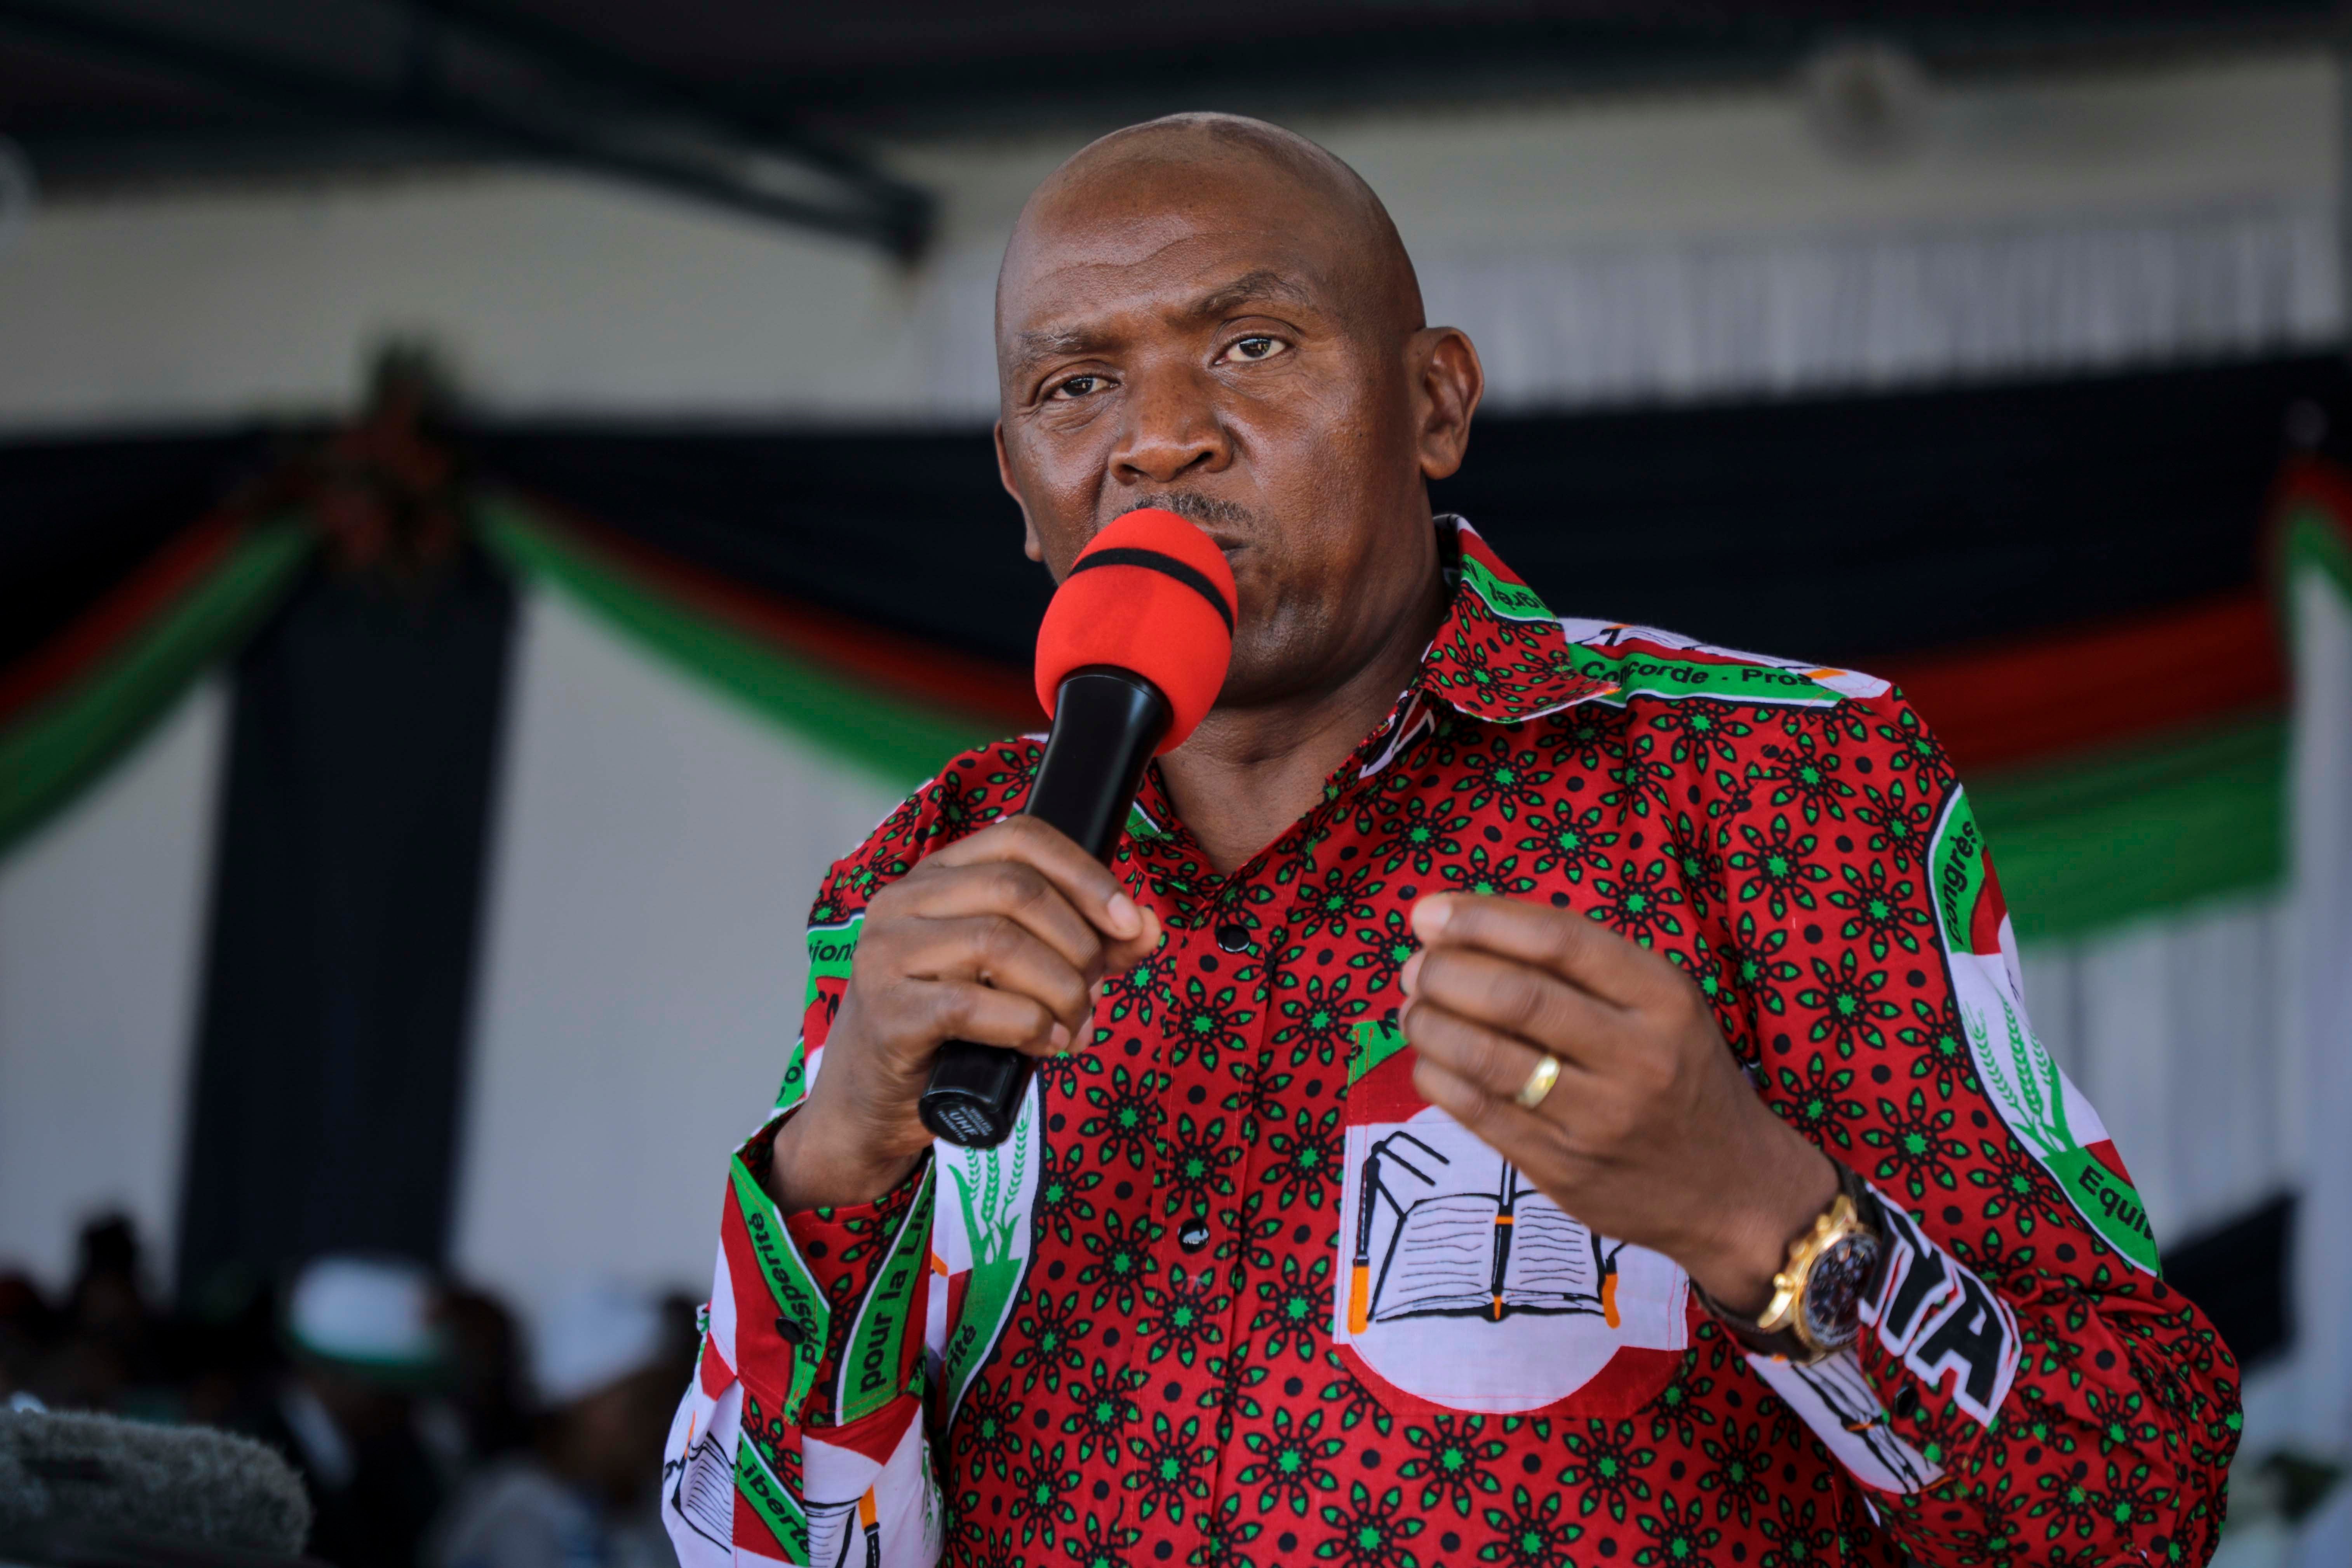 Opposition candidate Agathon Rwasa speaks at a meeting of the Congrès National pour la Liberté (National Congress for Freedom) party in Bujumbura, Burundi, on February 16, 2020.